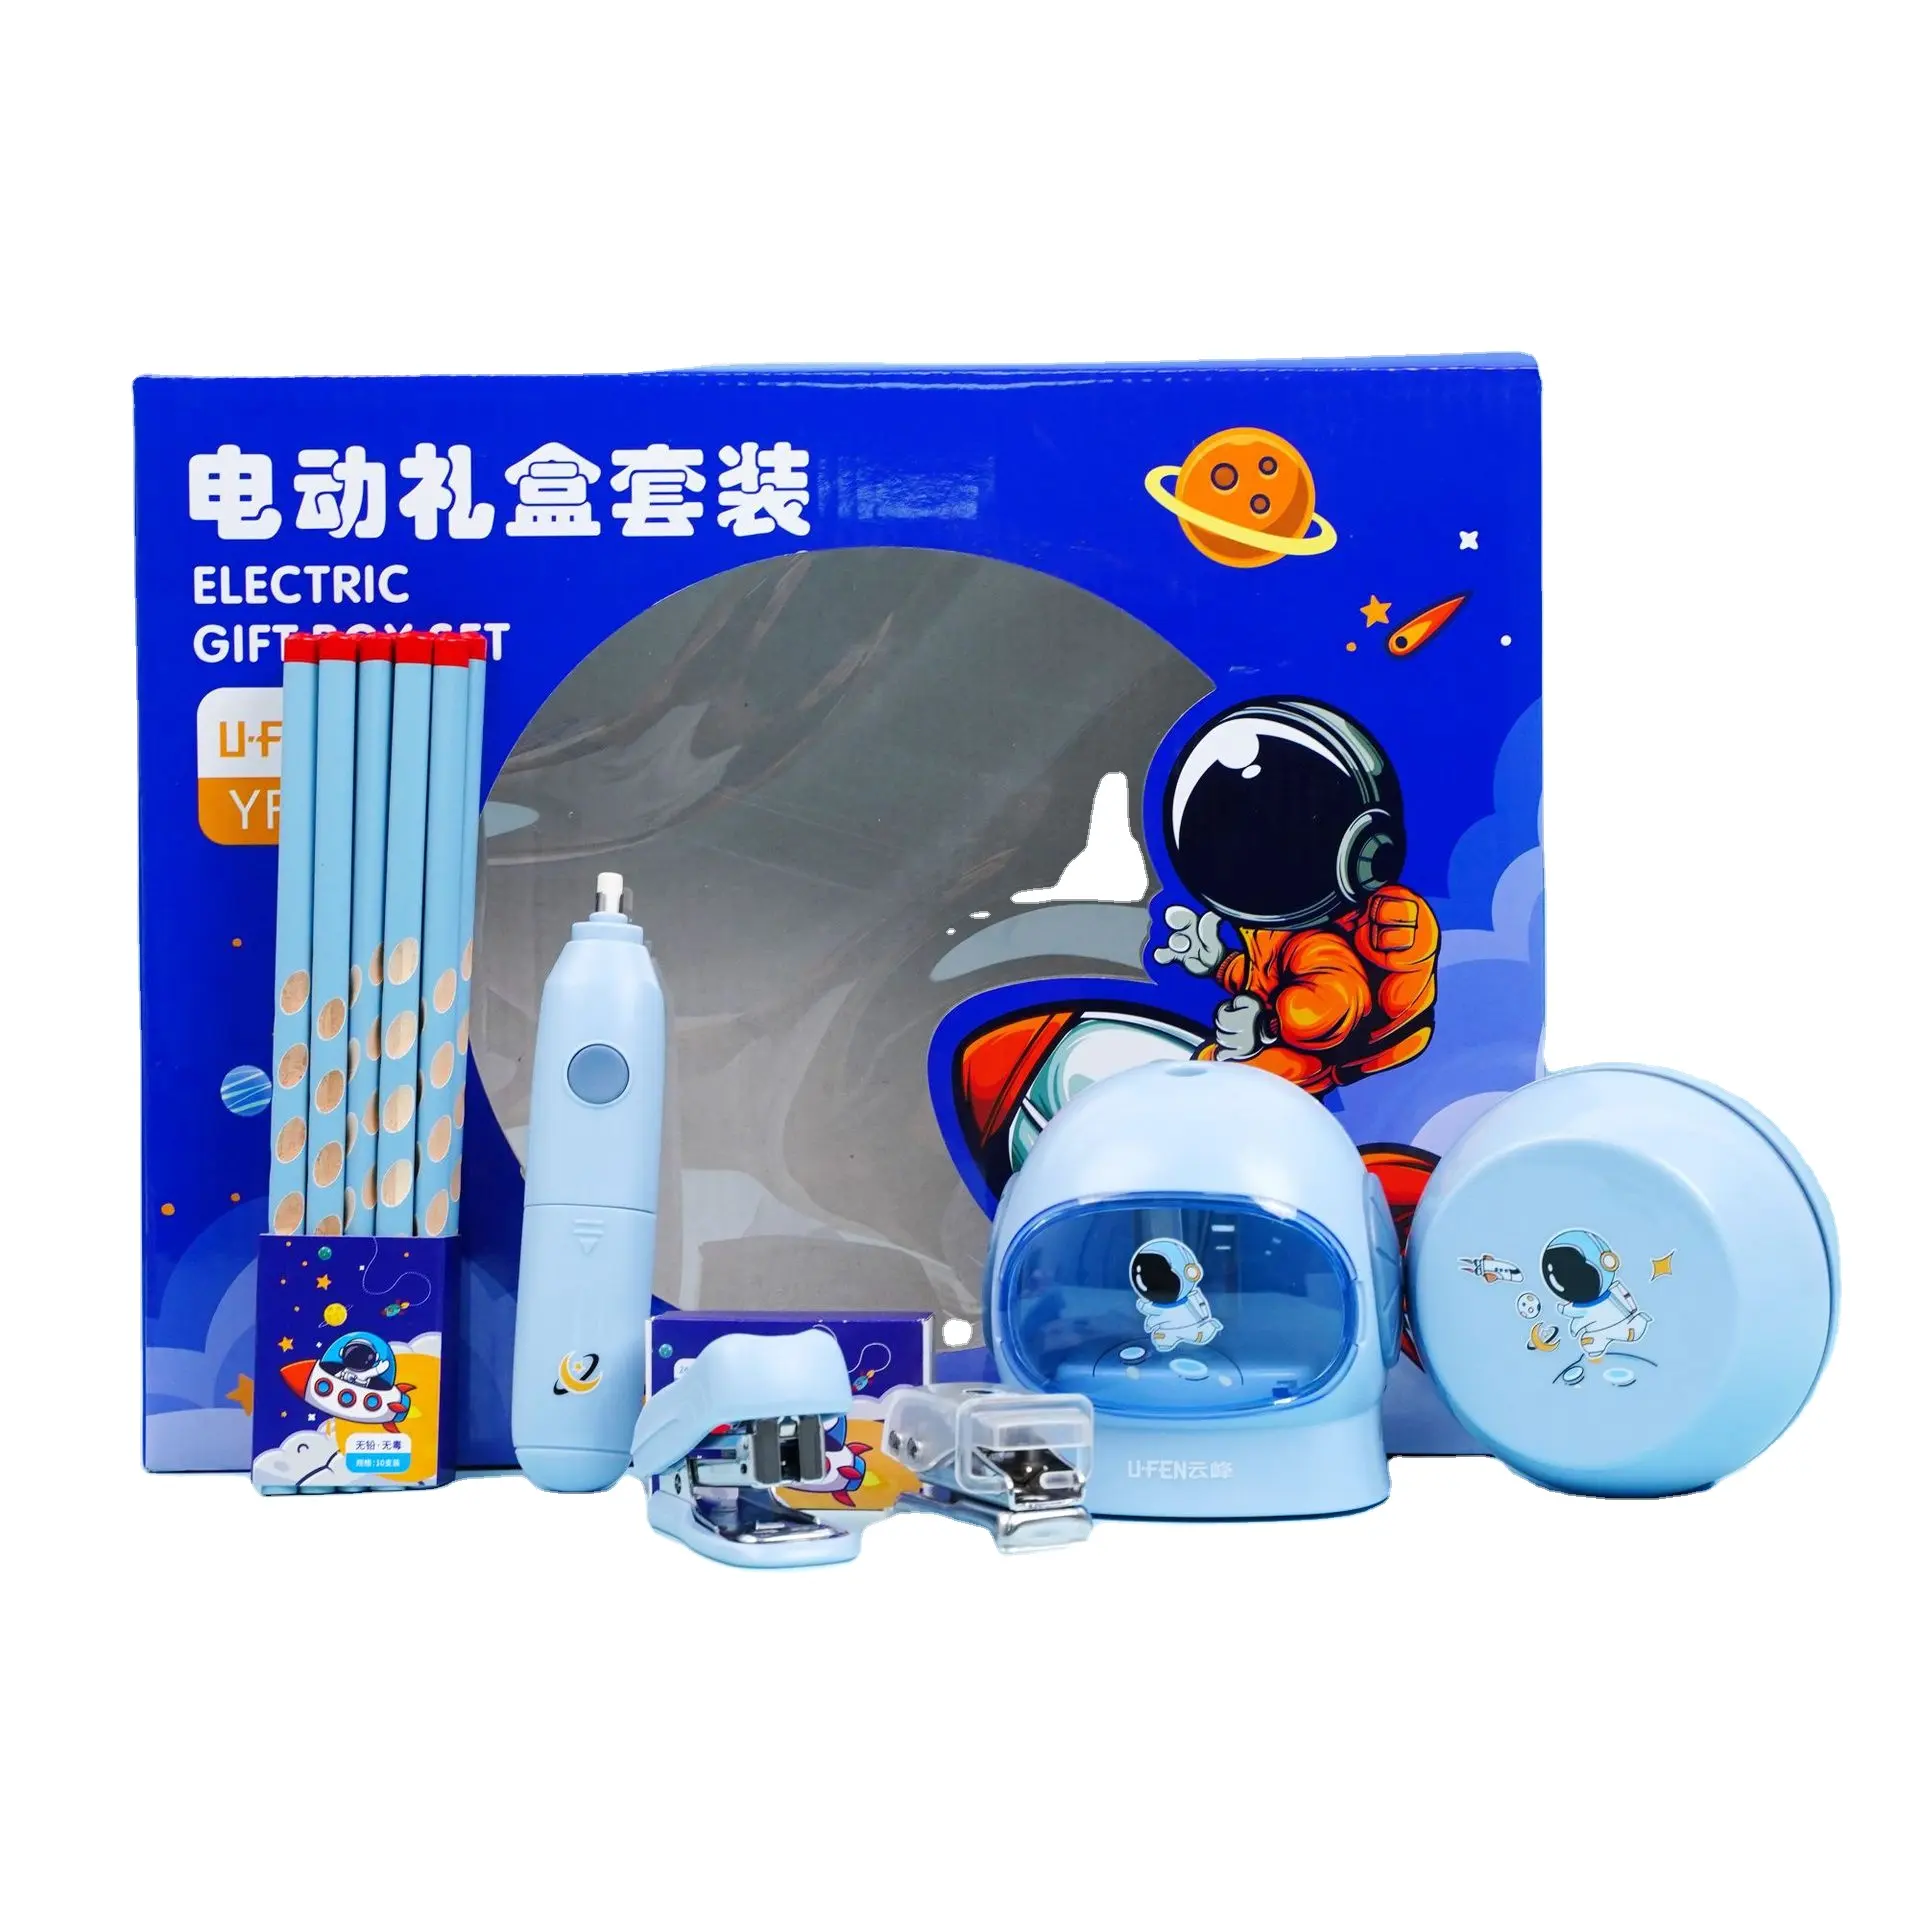 2023 Factory Promotional Back To School Gift Electric Pencil Sharpener stationery gift set School stationary accessories